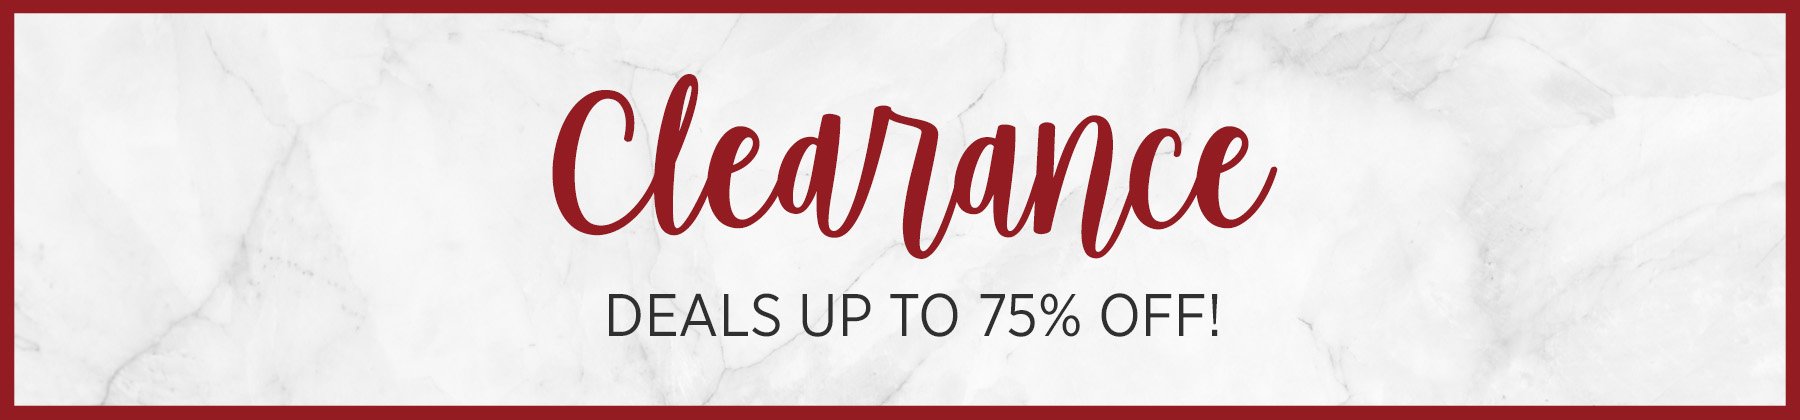 Clearance Banner - Up to 75% off!